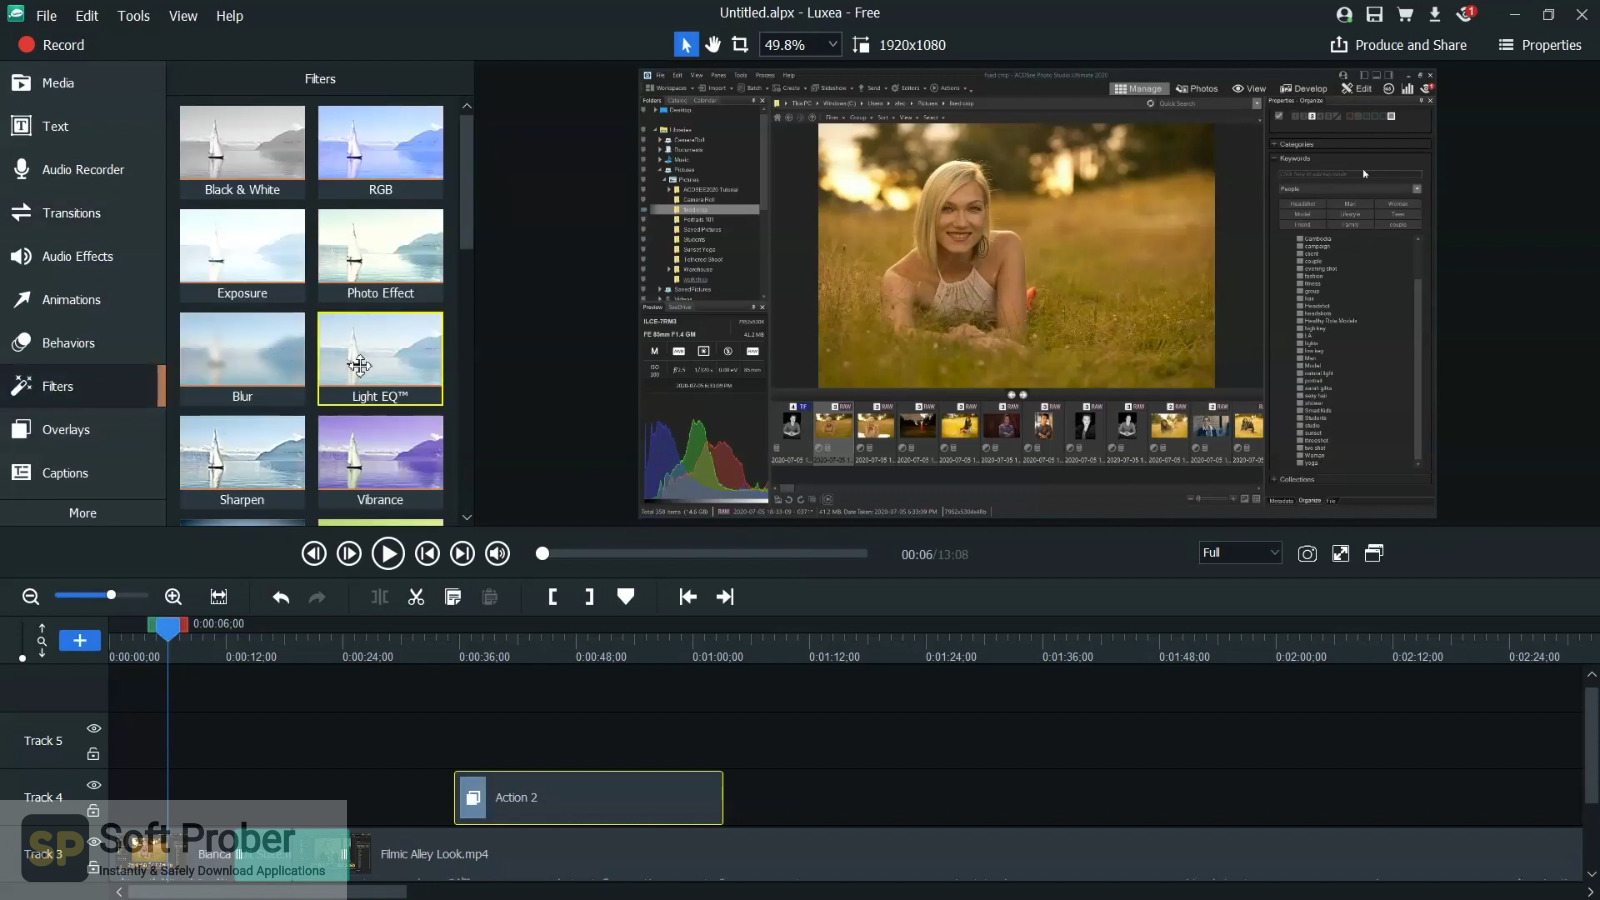 download the last version for windows ACDSee Luxea Video Editor 7.1.3.2421